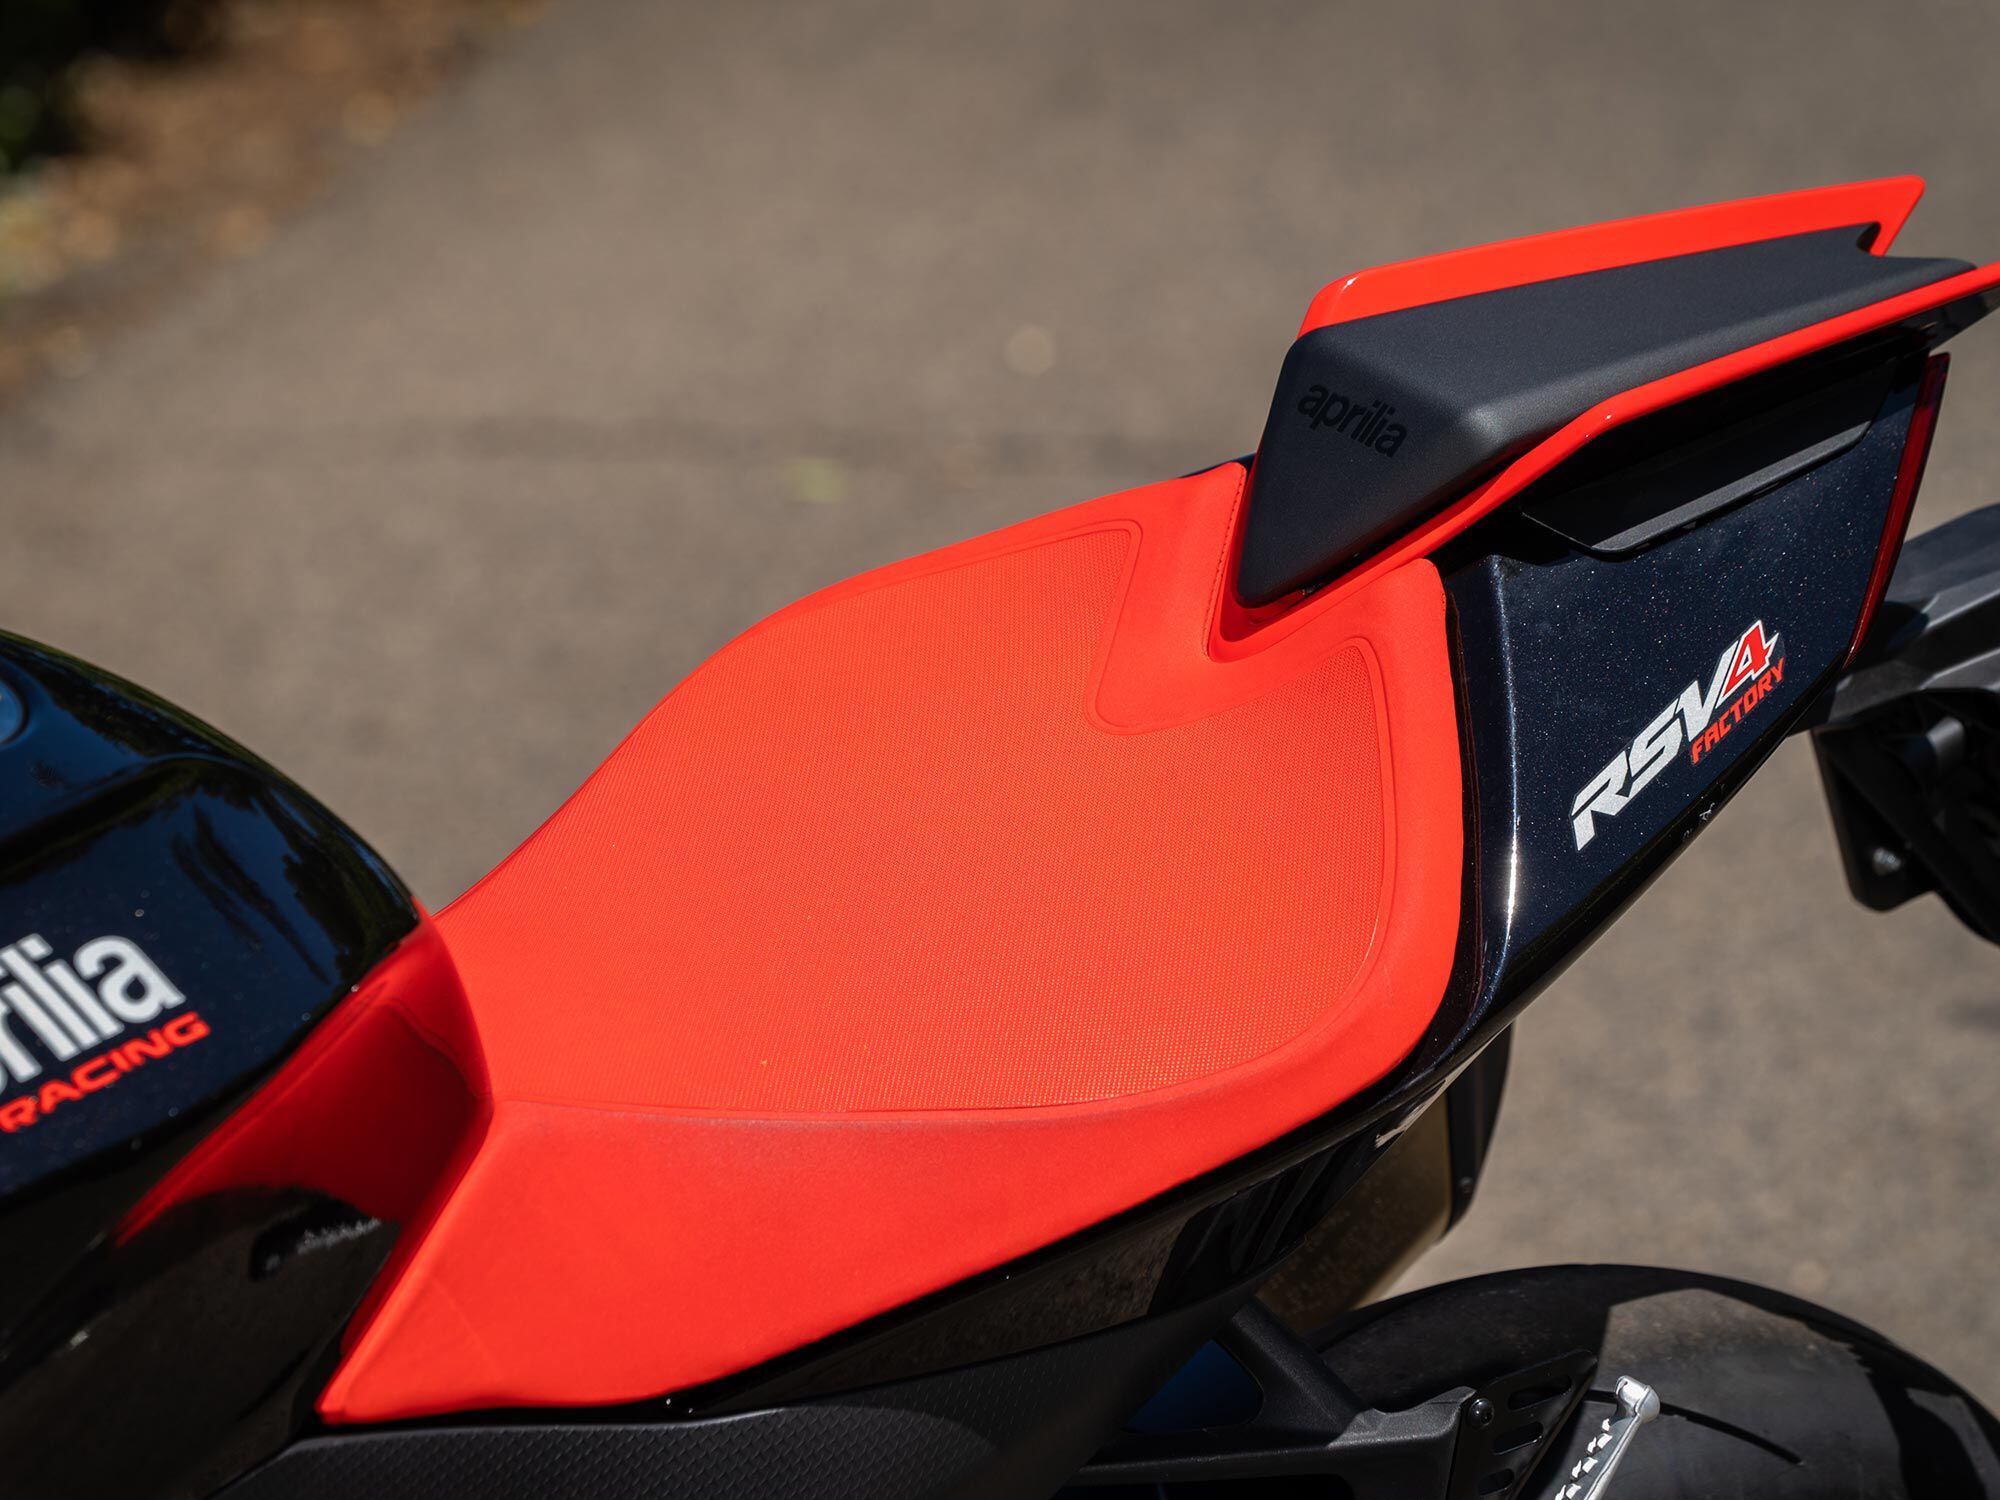 The RSV4 Factory’s saddle proved surprisingly comfortable. We also appreciate the grippy seat material.